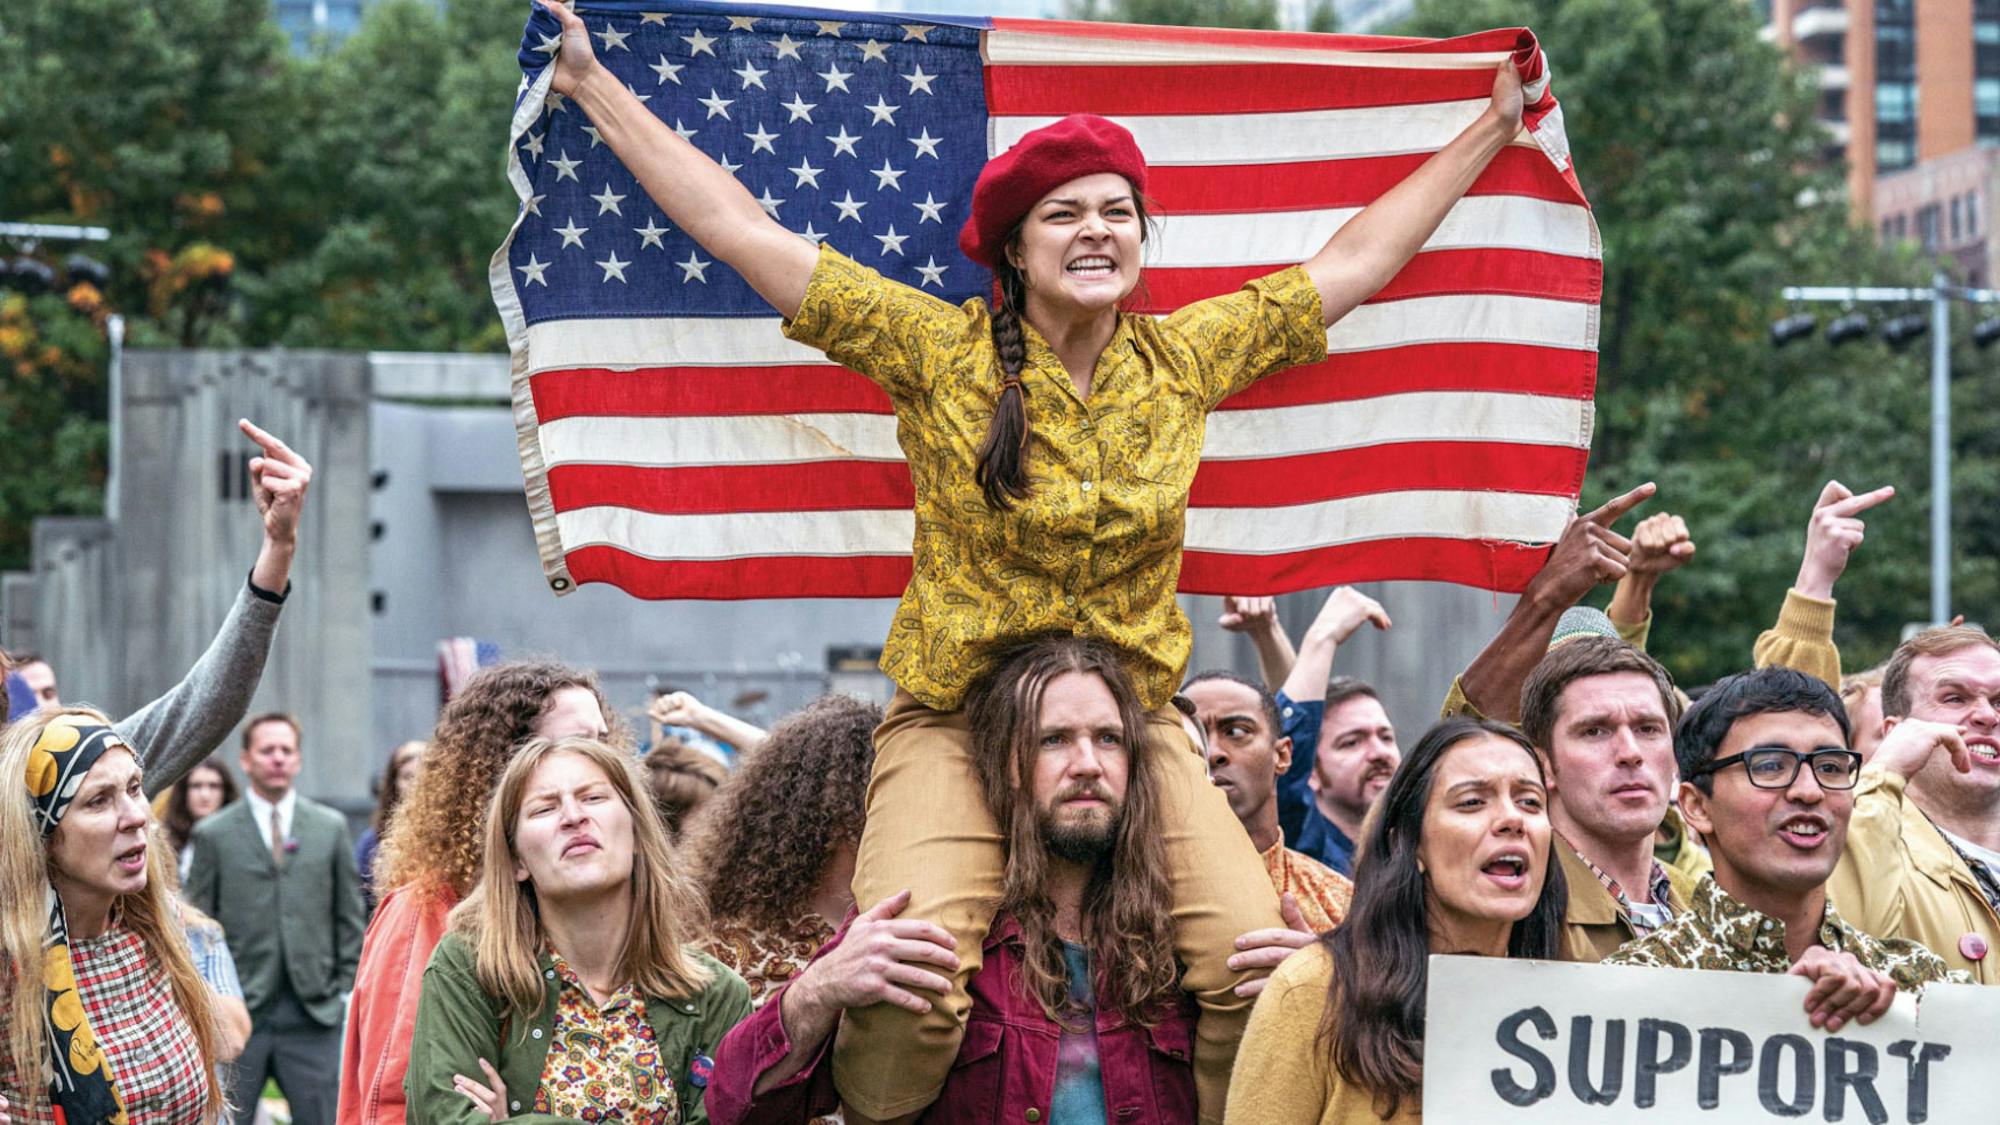 In this crowd scene, a young woman sits on a long-haired protester’s shoulders, wearing a red beret and holding an American flag outstretched. 